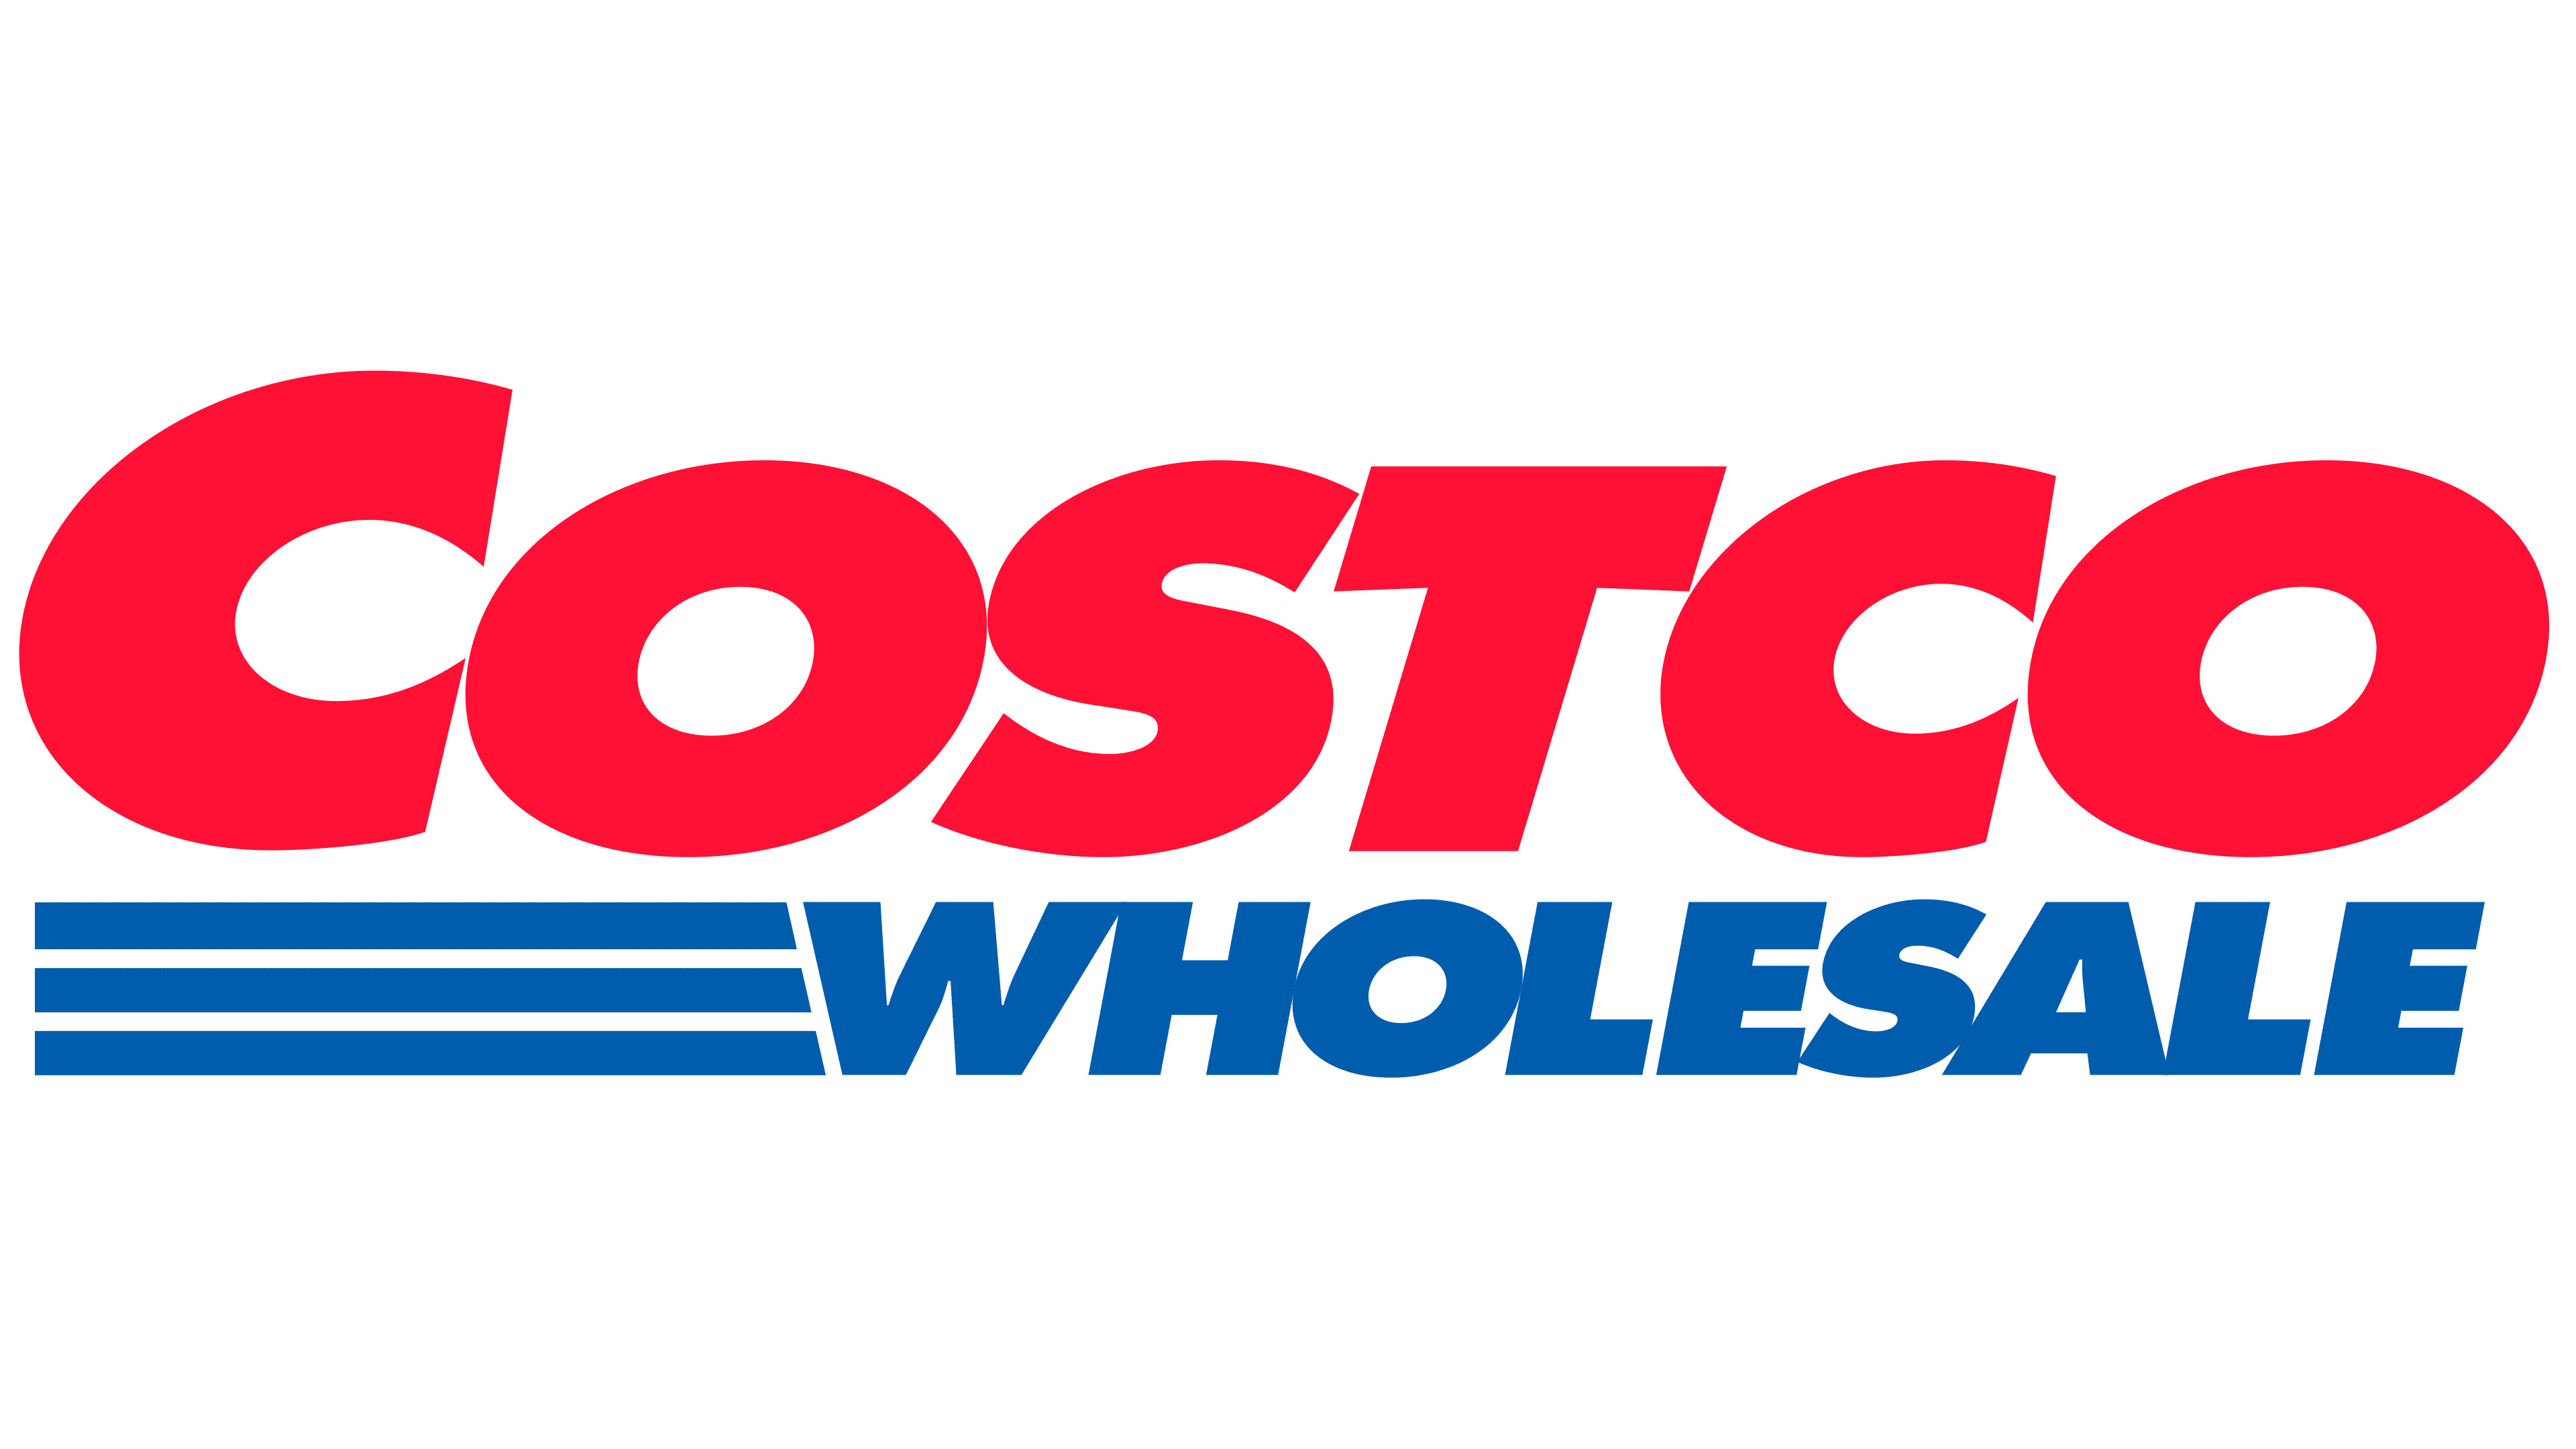 It’s Official; Costco is Coming to Queen Creek in the Fall/Winter of 2022